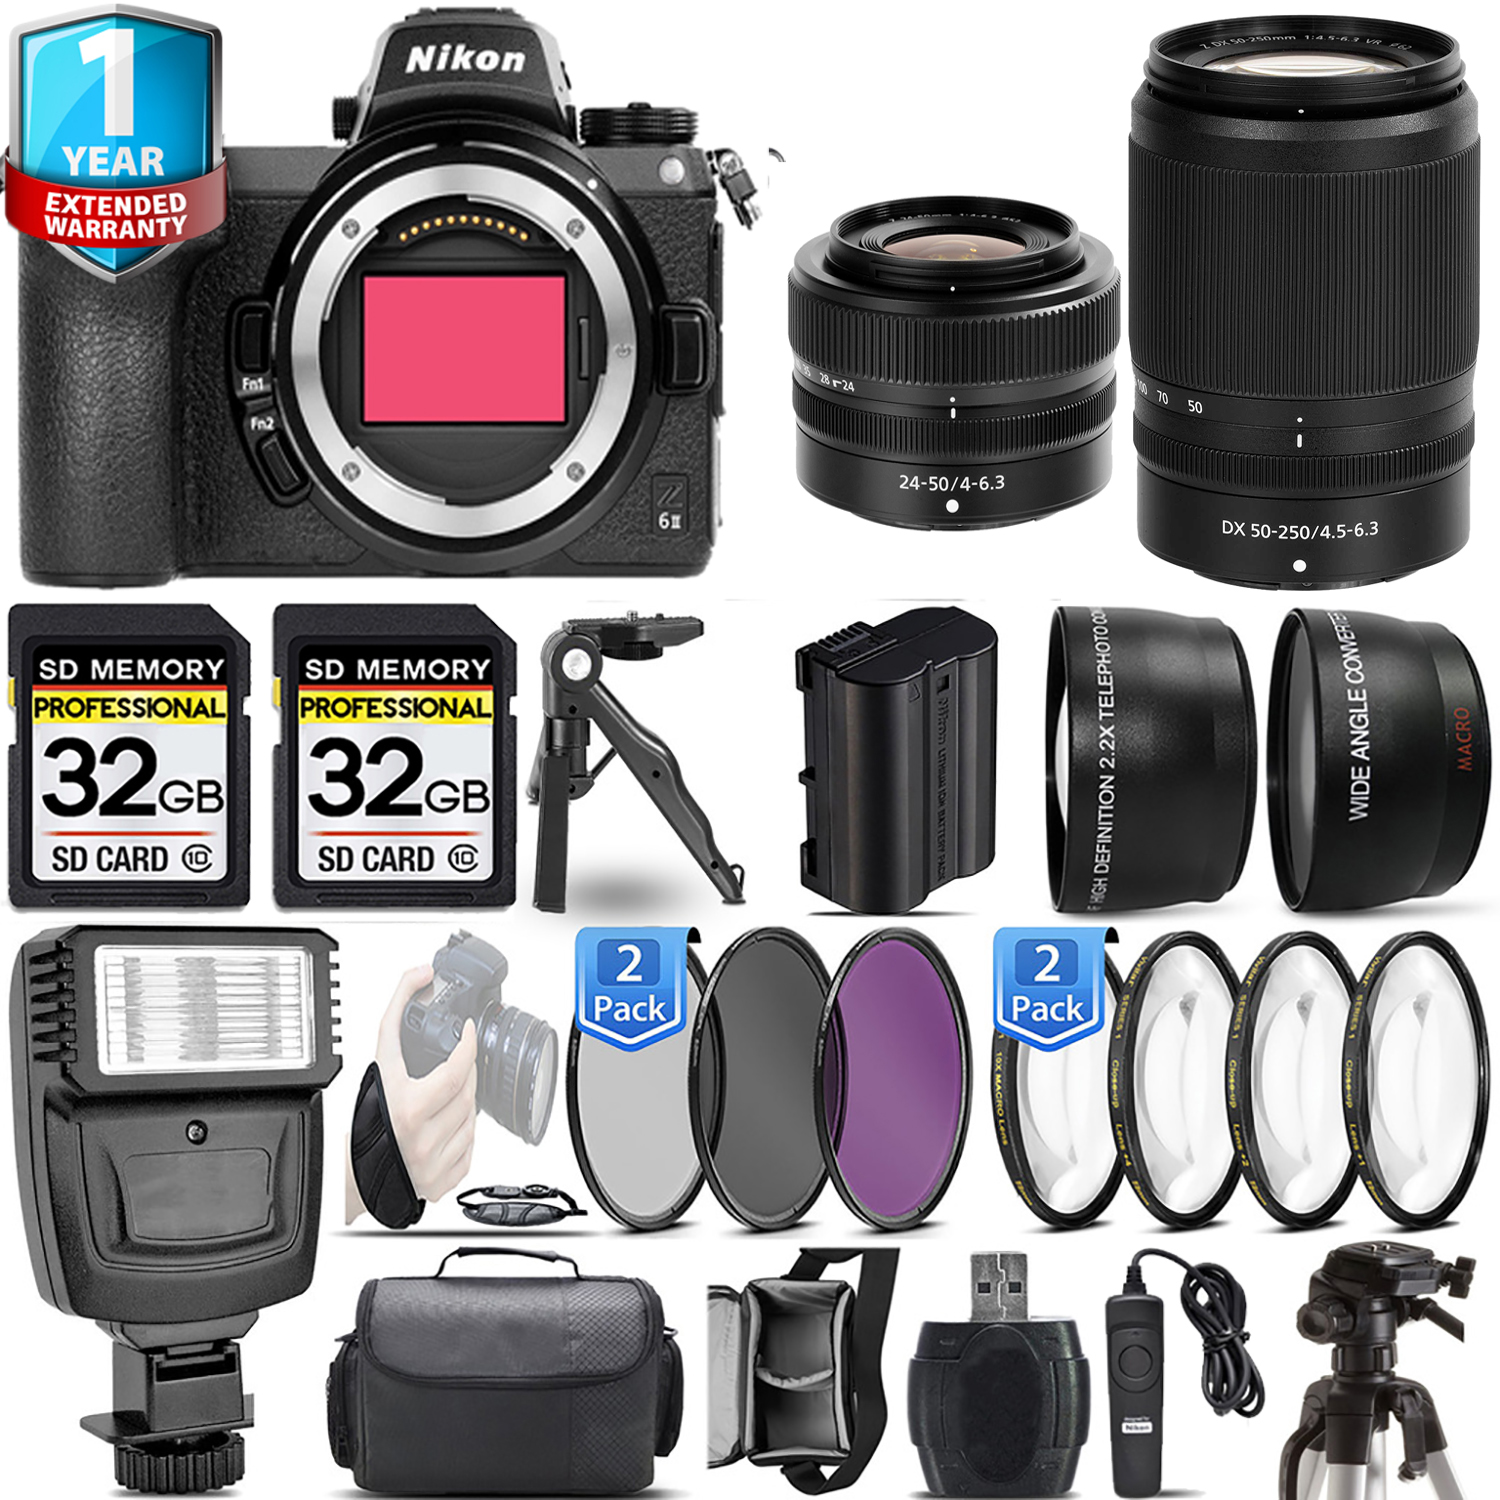 Z6 II Mirrorless Camera + 50-250mm + 24-50mm + 1 Year Extended Warranty + 64GB Basic Kit *FREE SHIPPING*